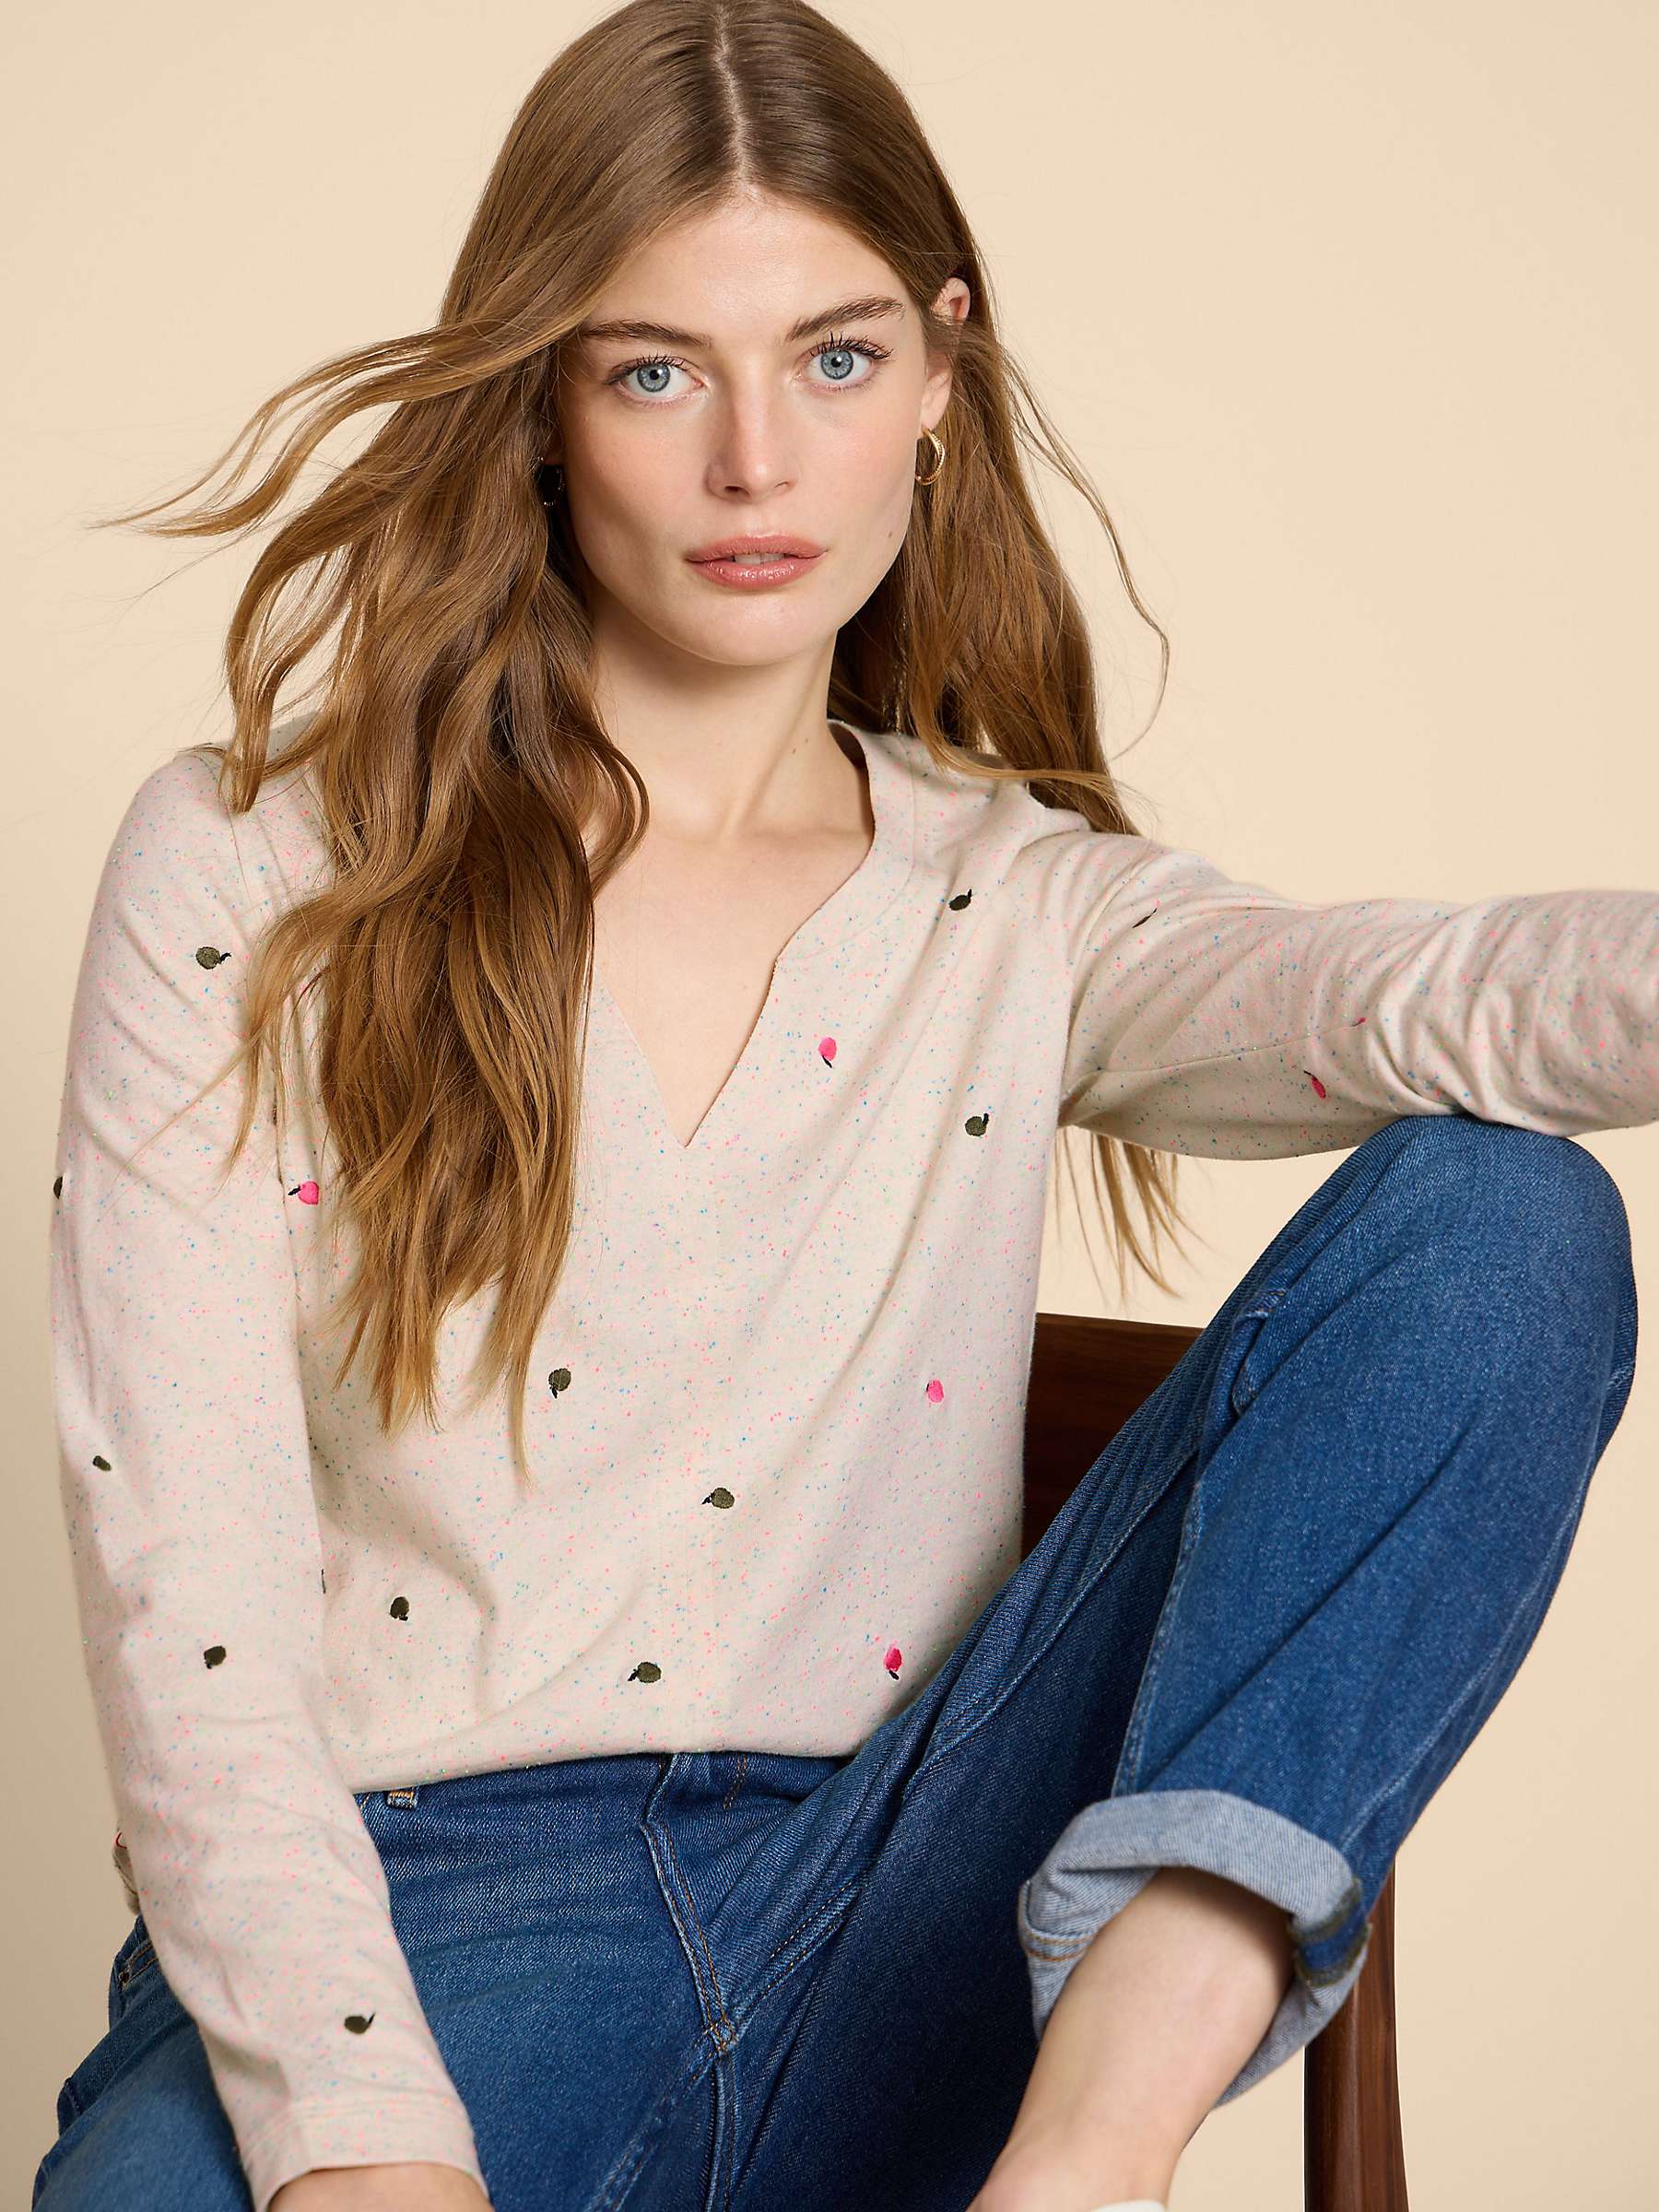 Buy White Stuff Nelly Long Sleeve Embroided T-Shirt, Neutral/Multi Online at johnlewis.com